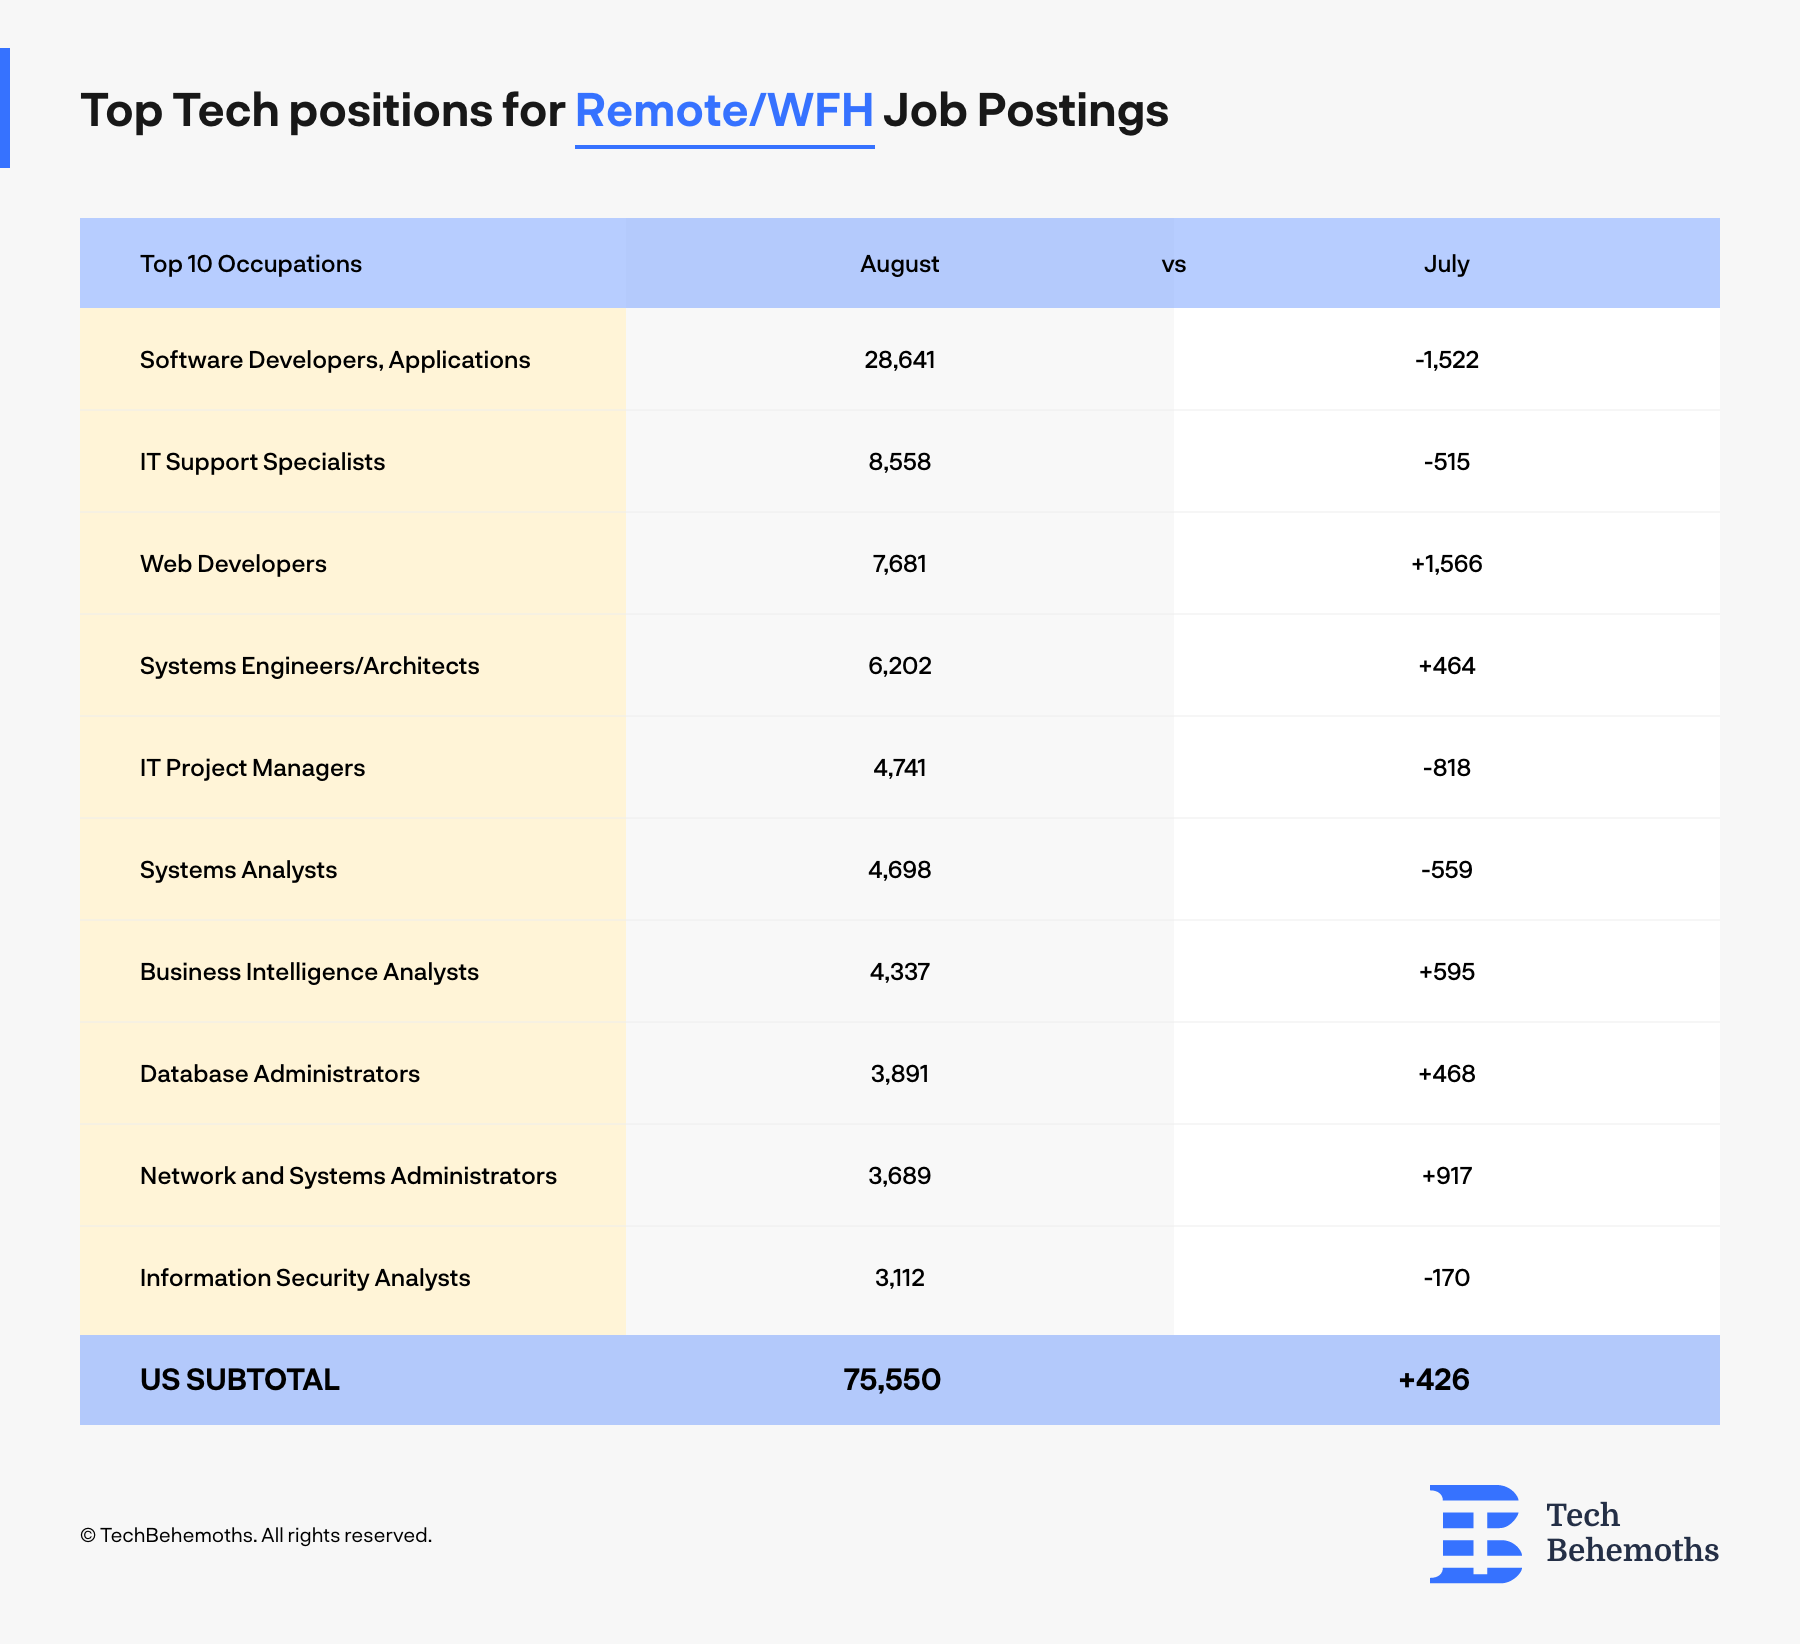 top tech positions for remote job postings in US in 2021